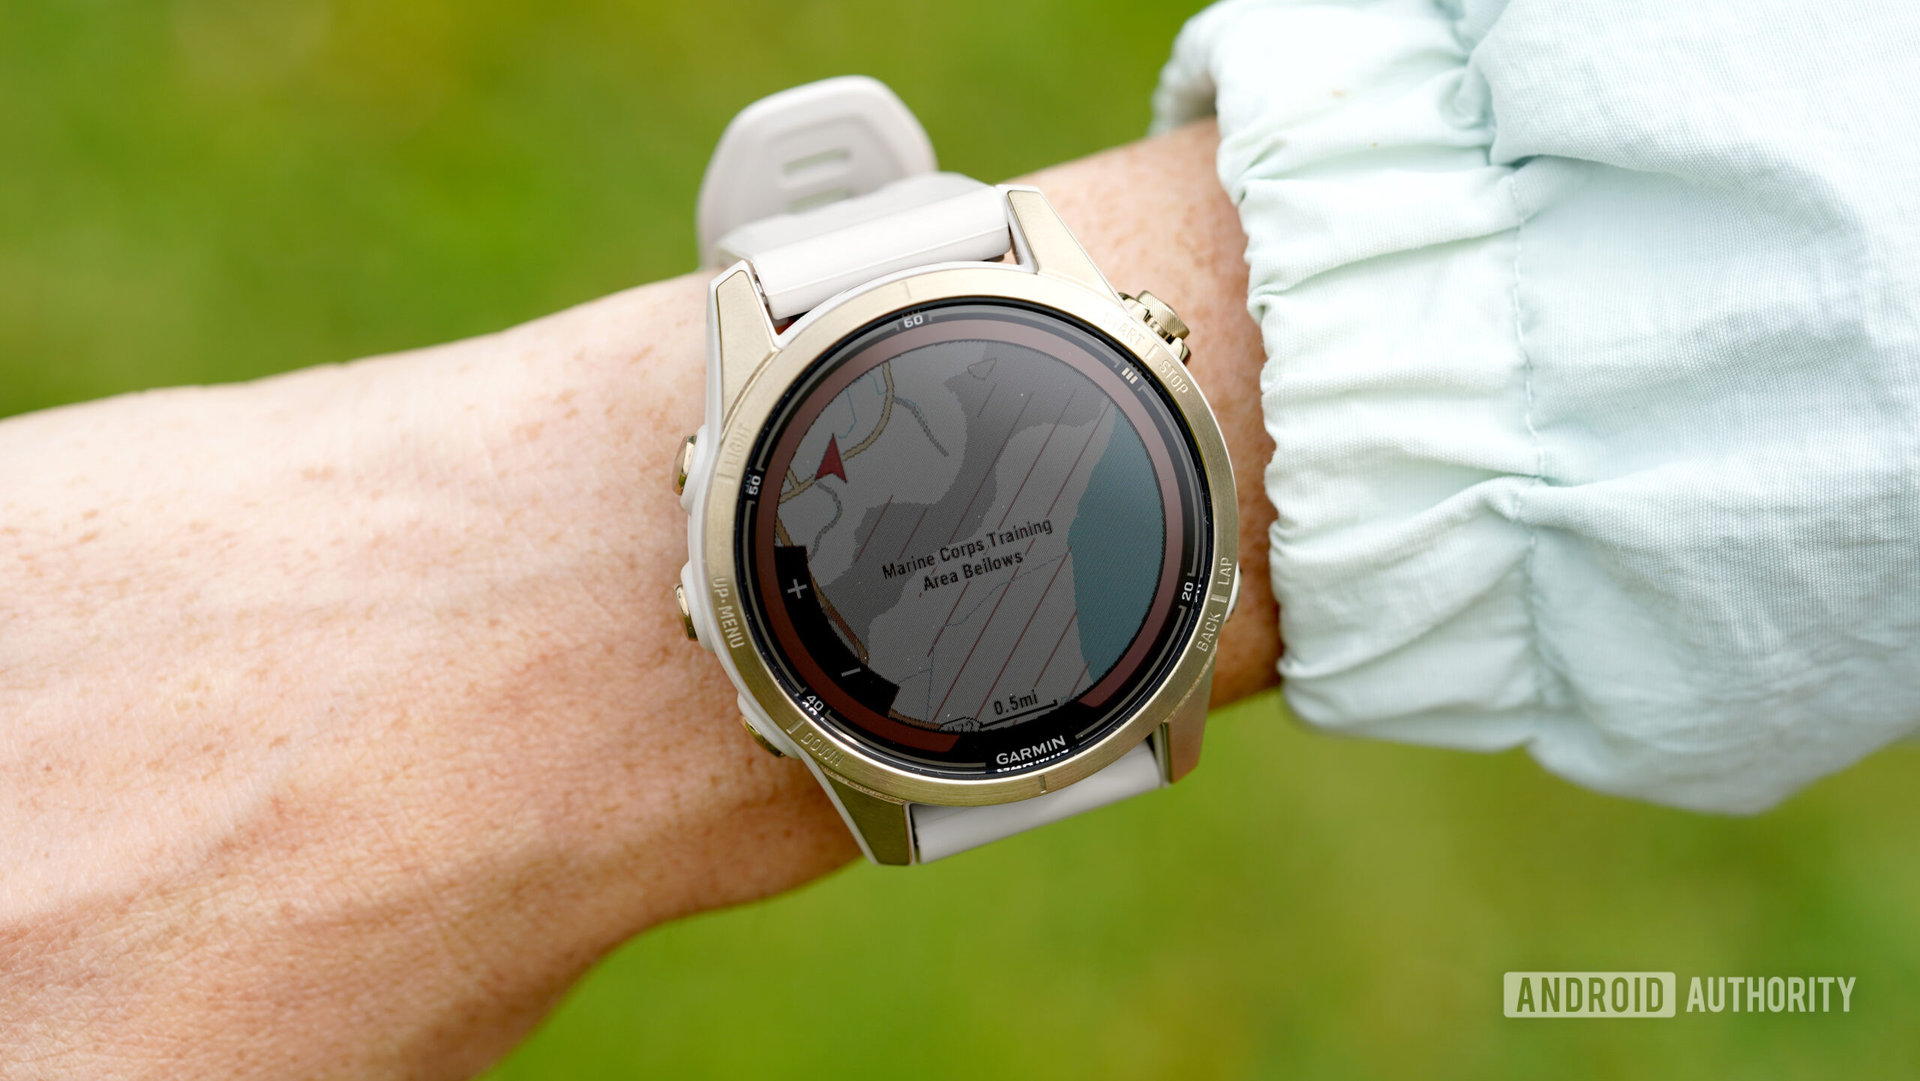 A Garmin device displays relief shading on its maps.